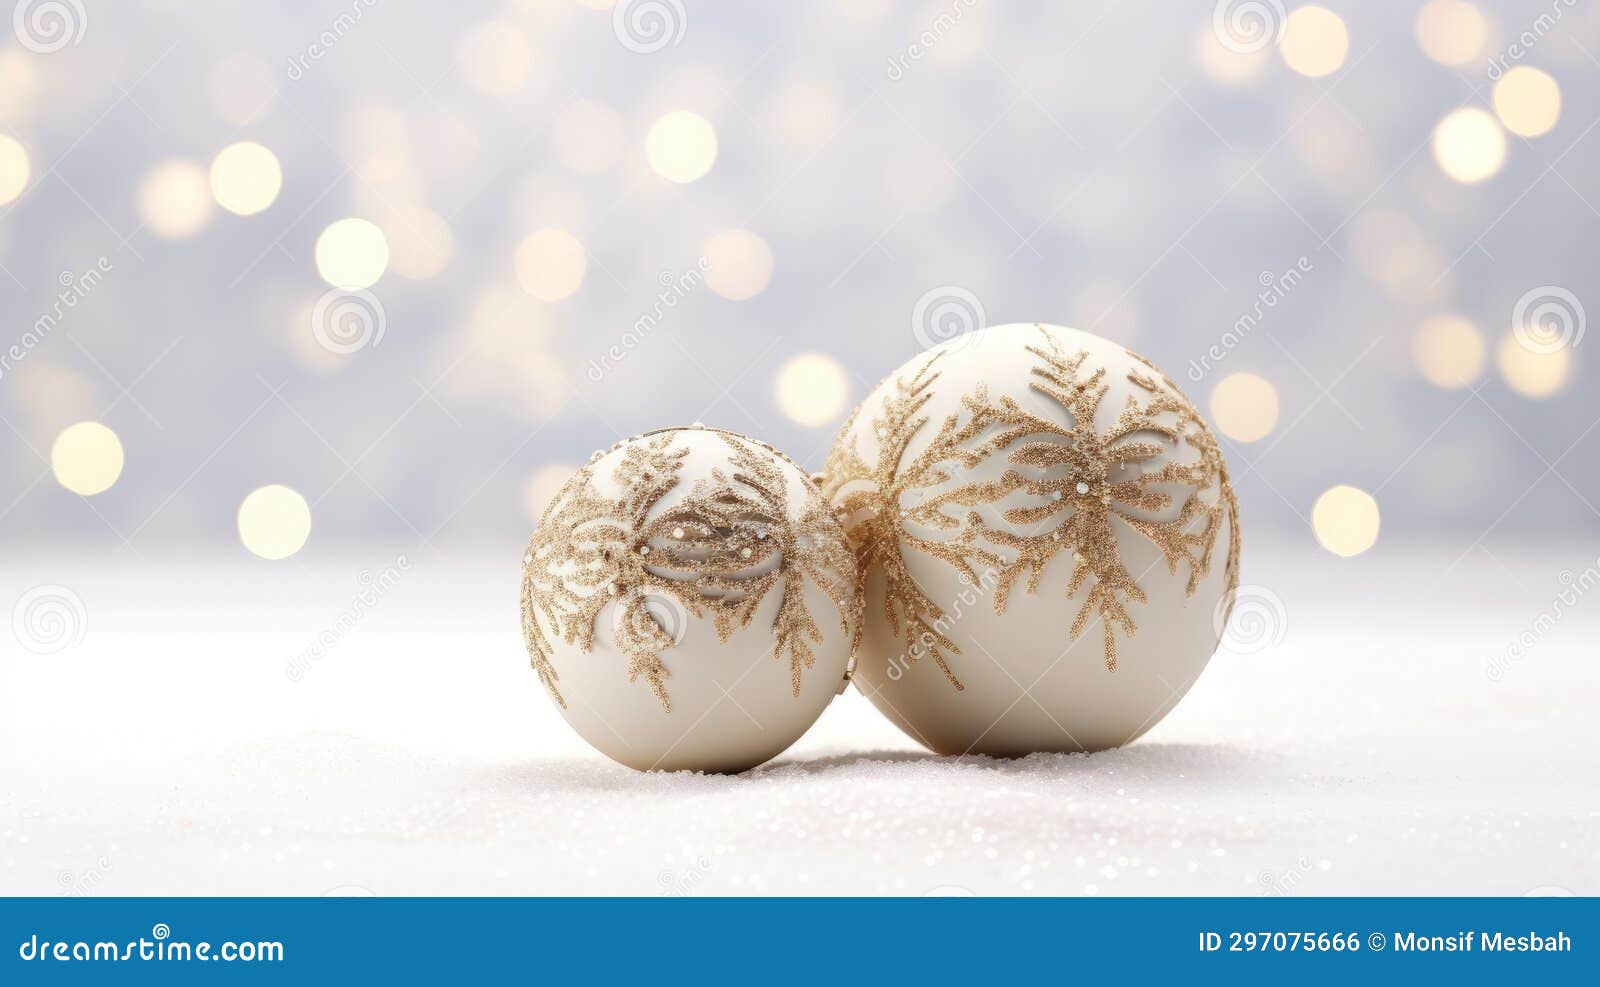 shimmering splendor: two golden christmas ornaments on a snowy white background